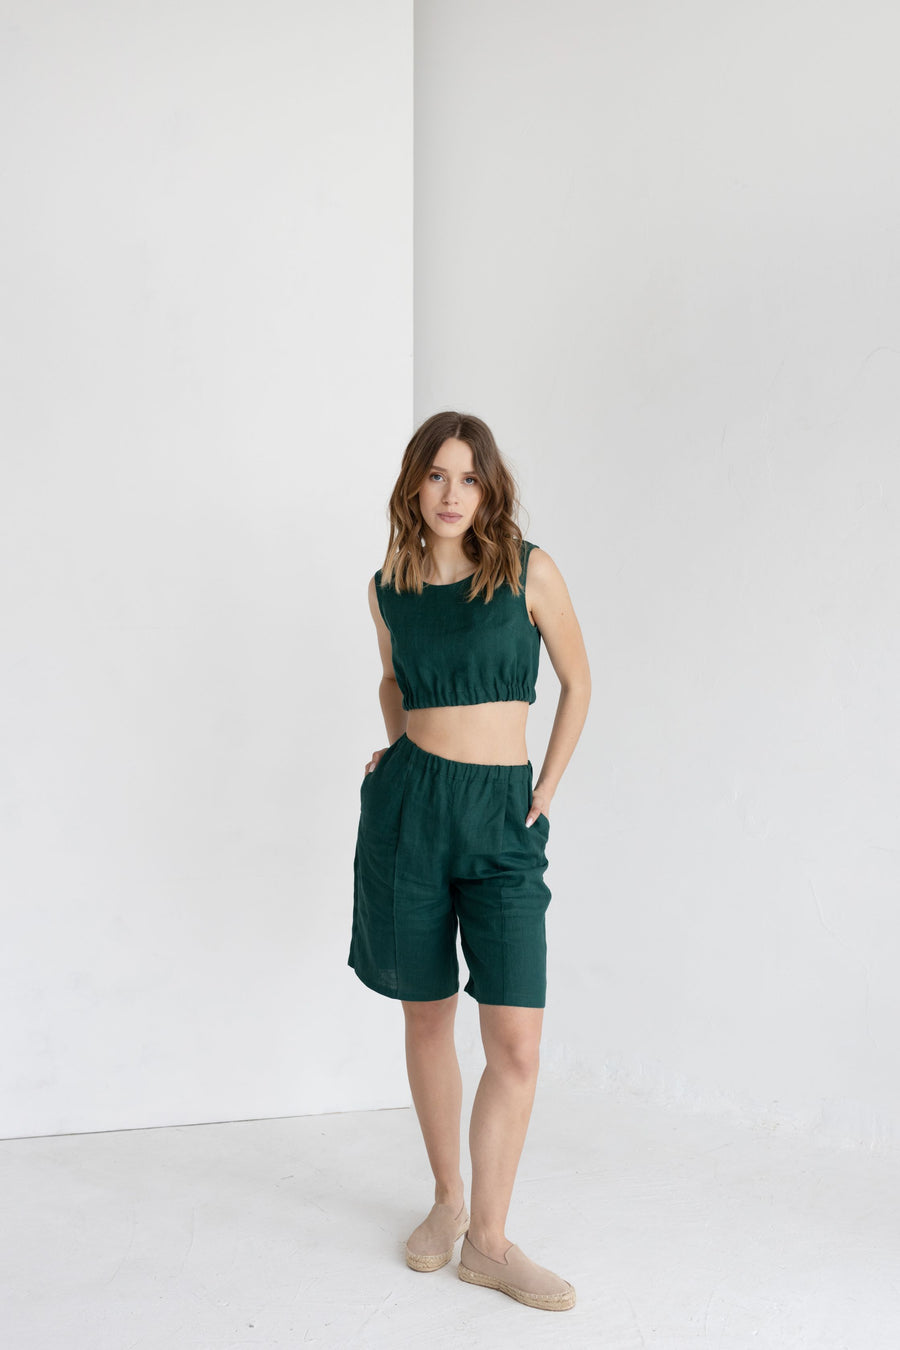 Emerald Linen Two-Piece Shorts and Top set